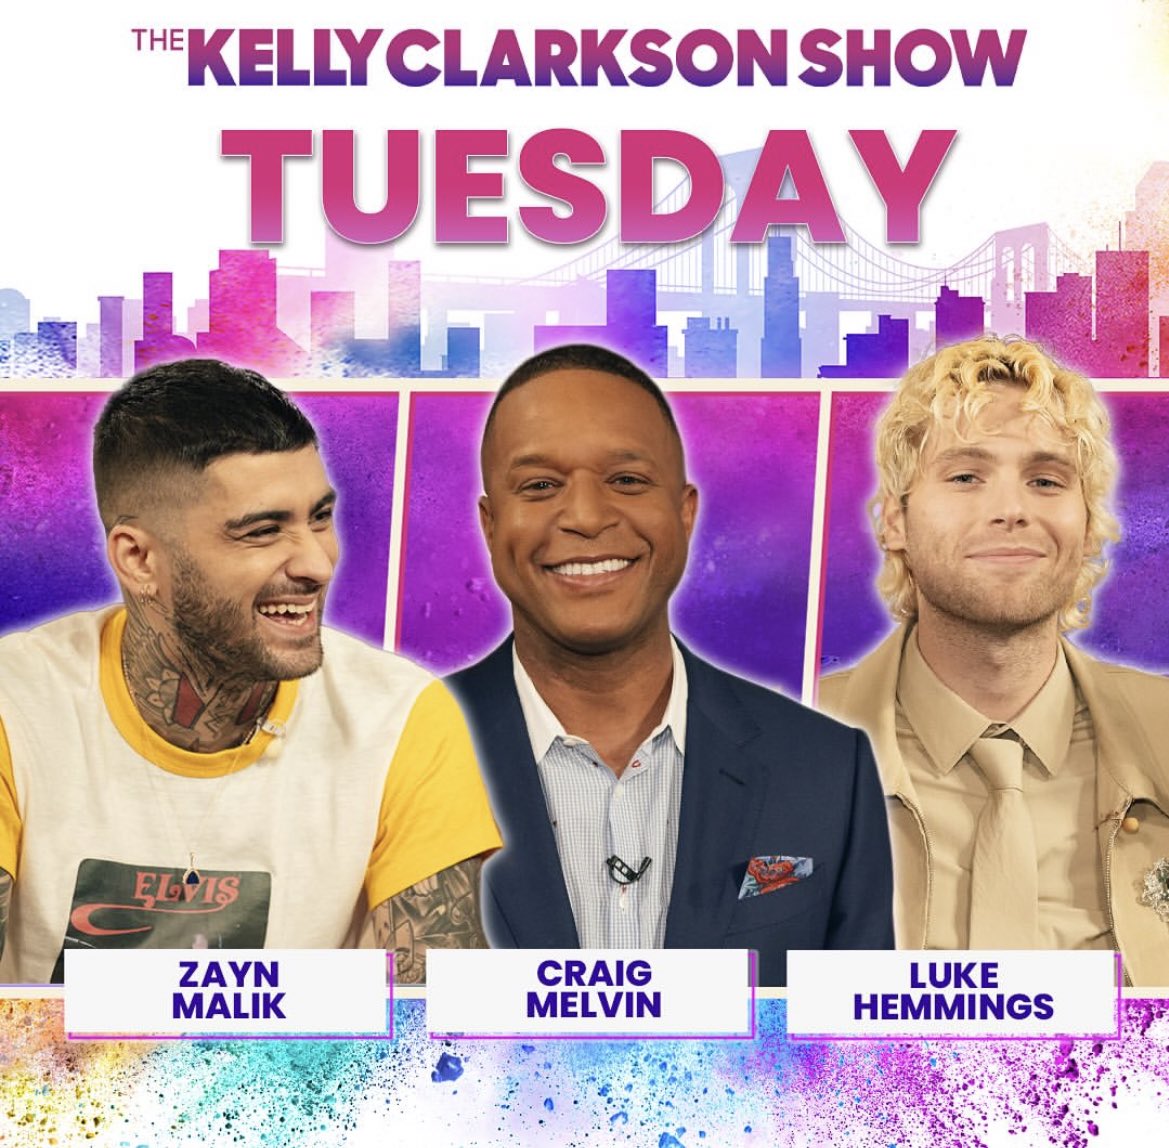 📲 Luke will be on The Kelly Clarkson show the same day as Zayn!